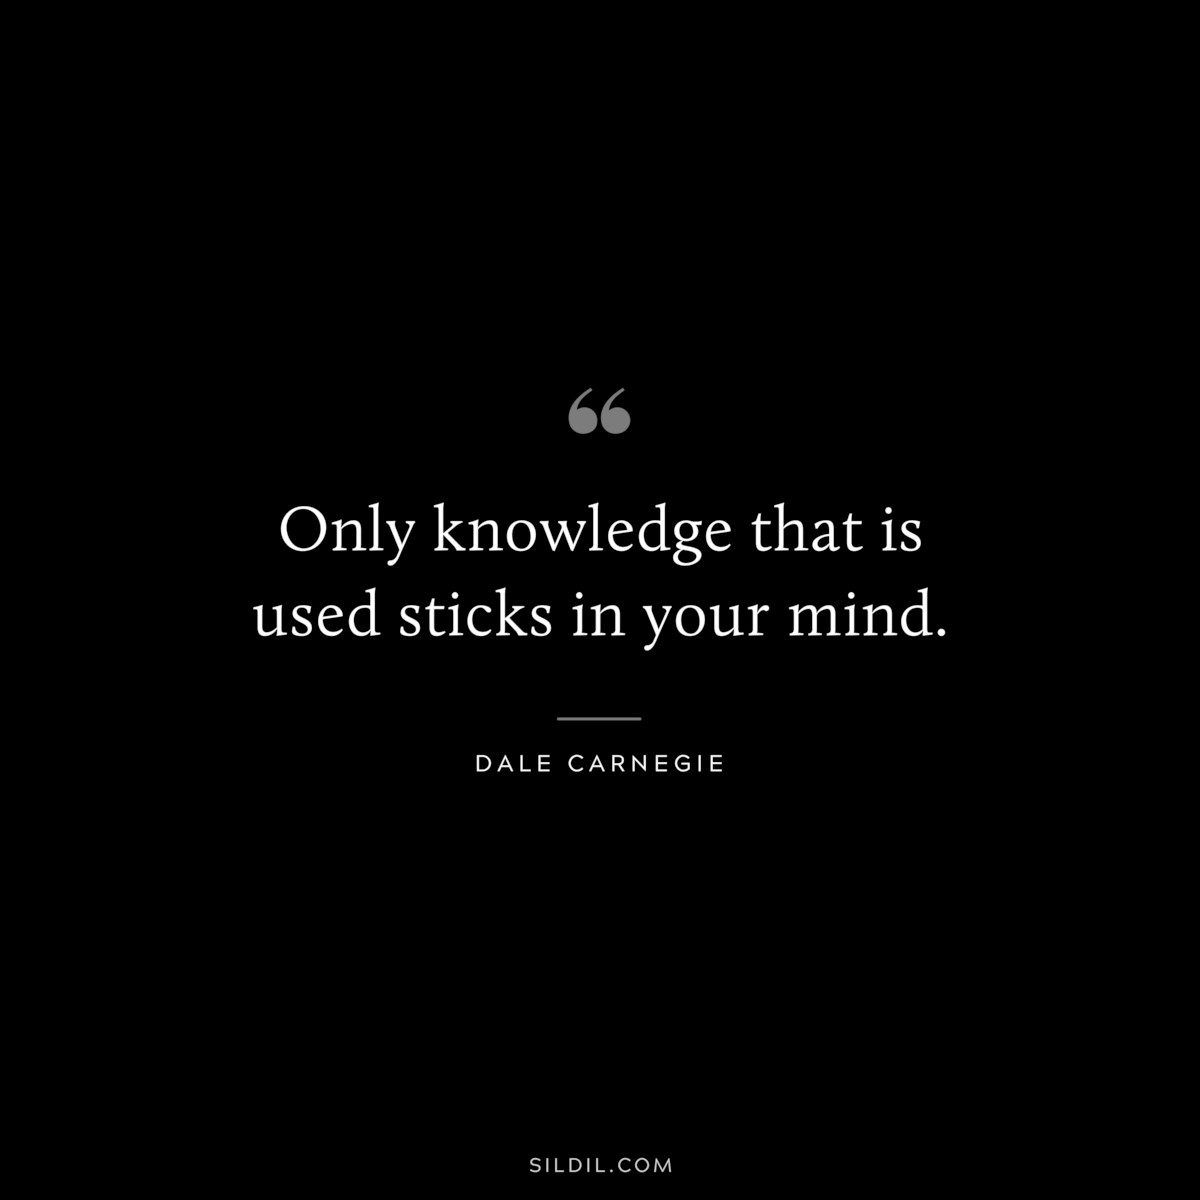 Only knowledge that is used sticks in your mind.― Dale Carnegie